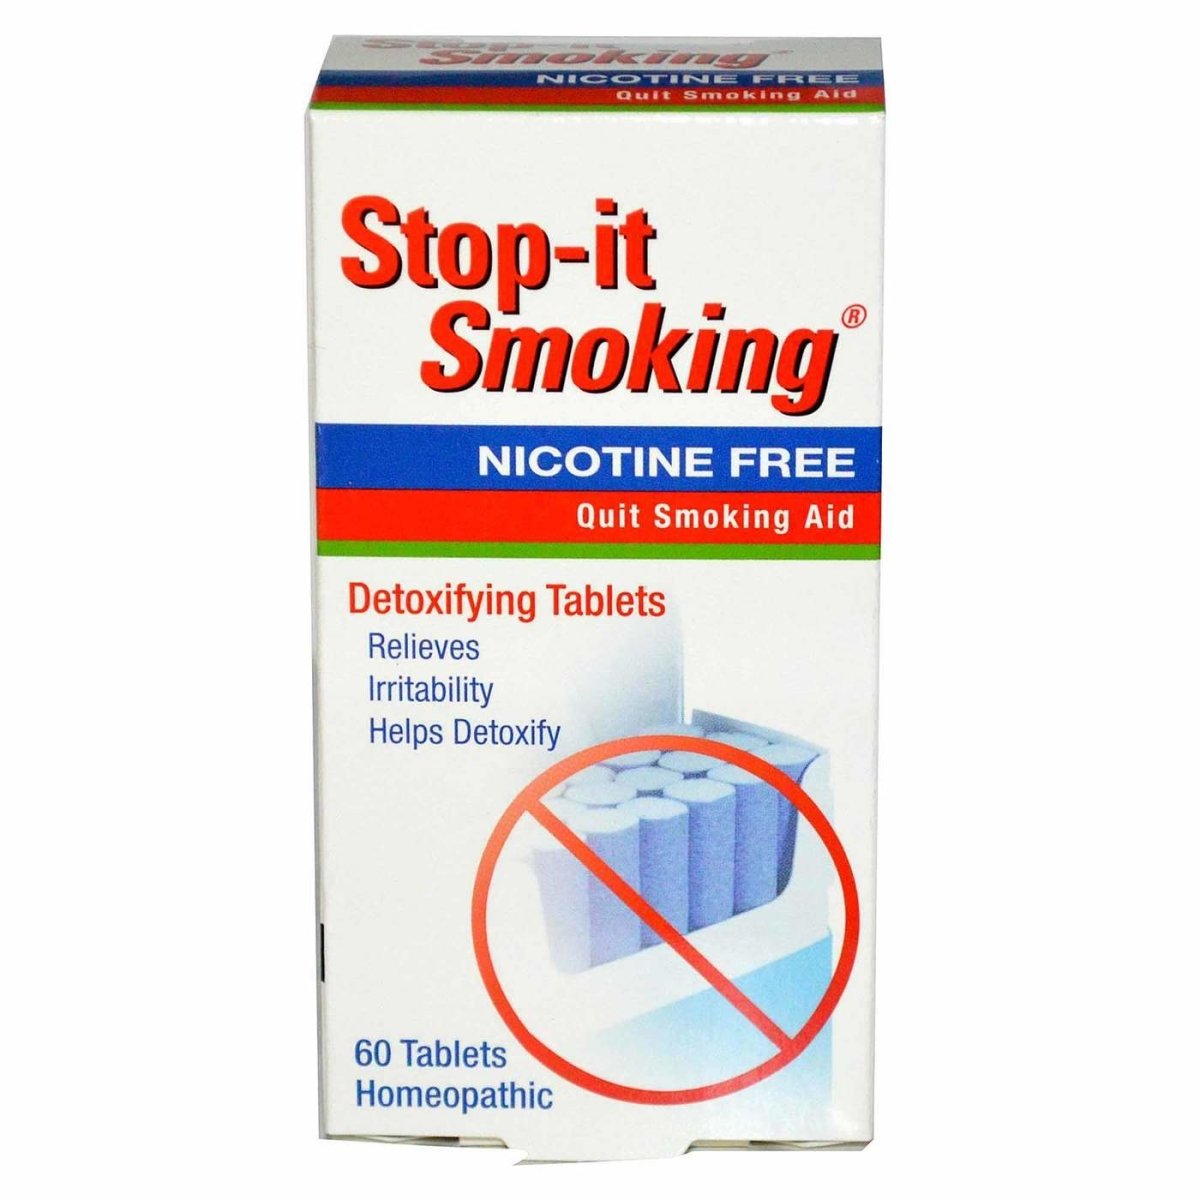 Stop-it Smoking 60 Tablets